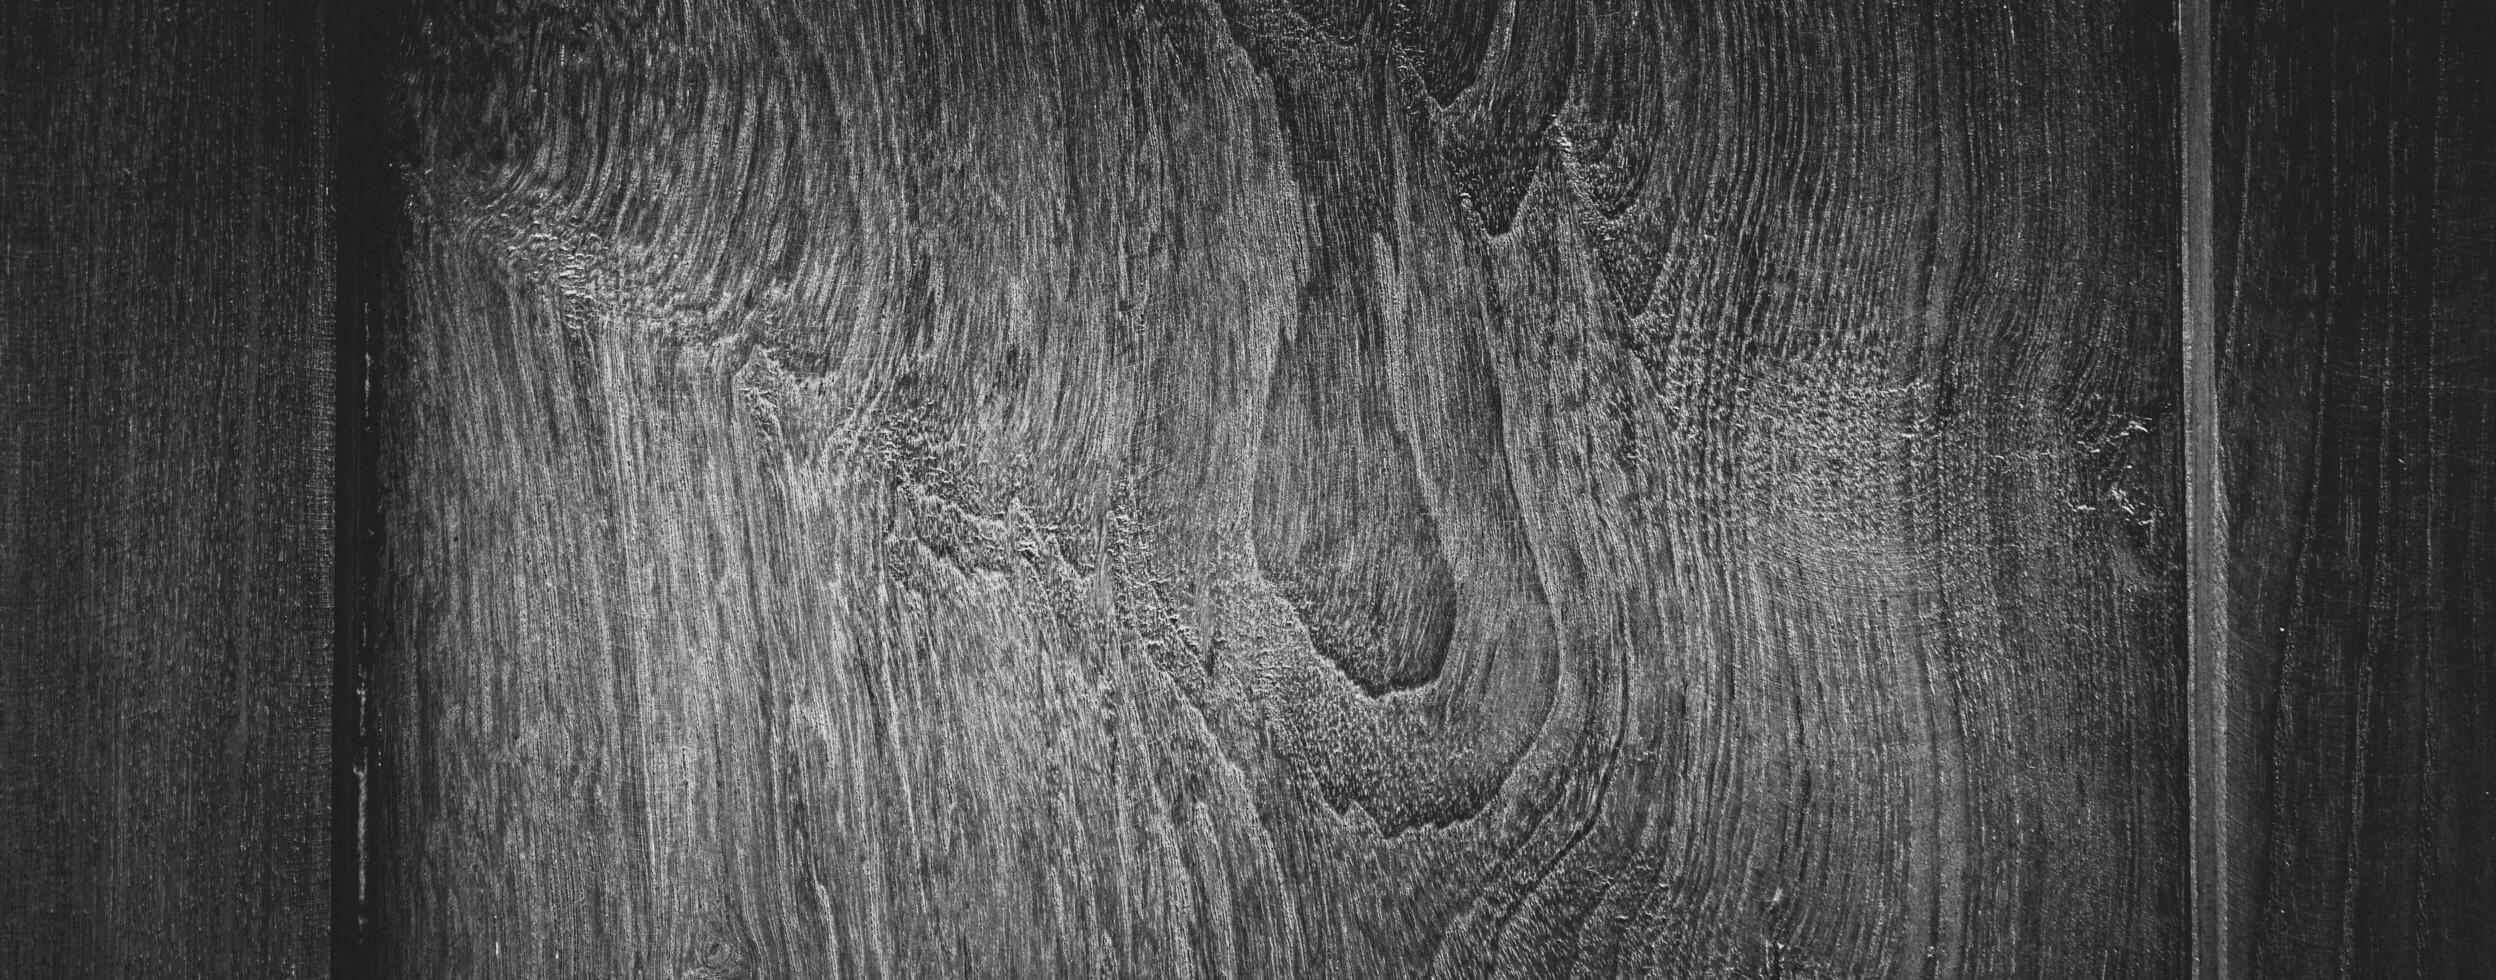 Black and white Old wooden texture abstract background photo